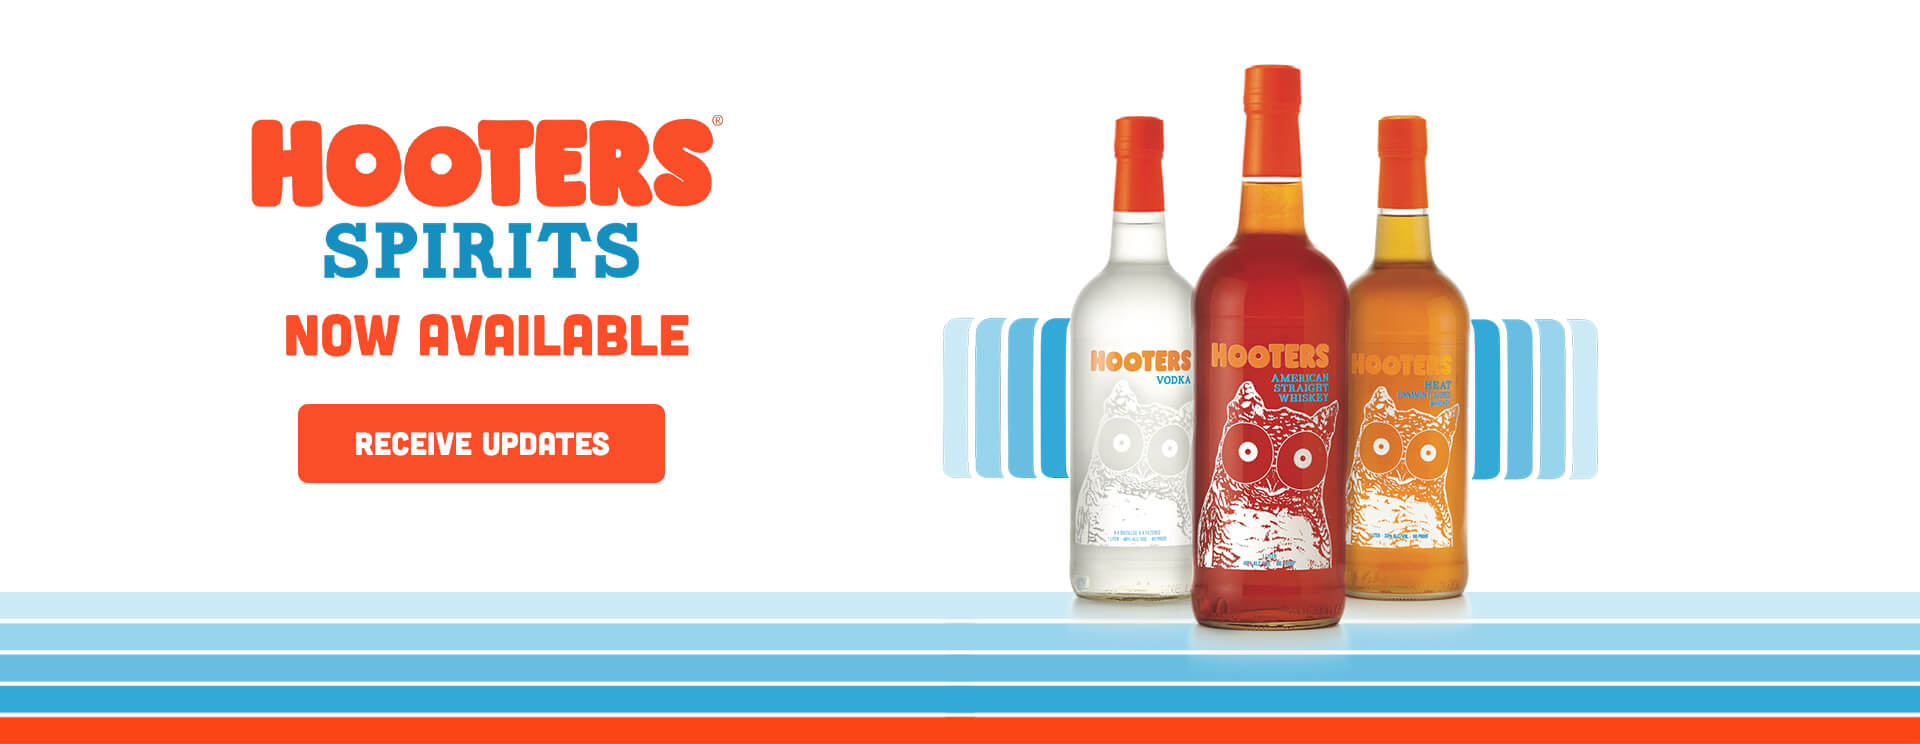 Hooters Spirits Now Available